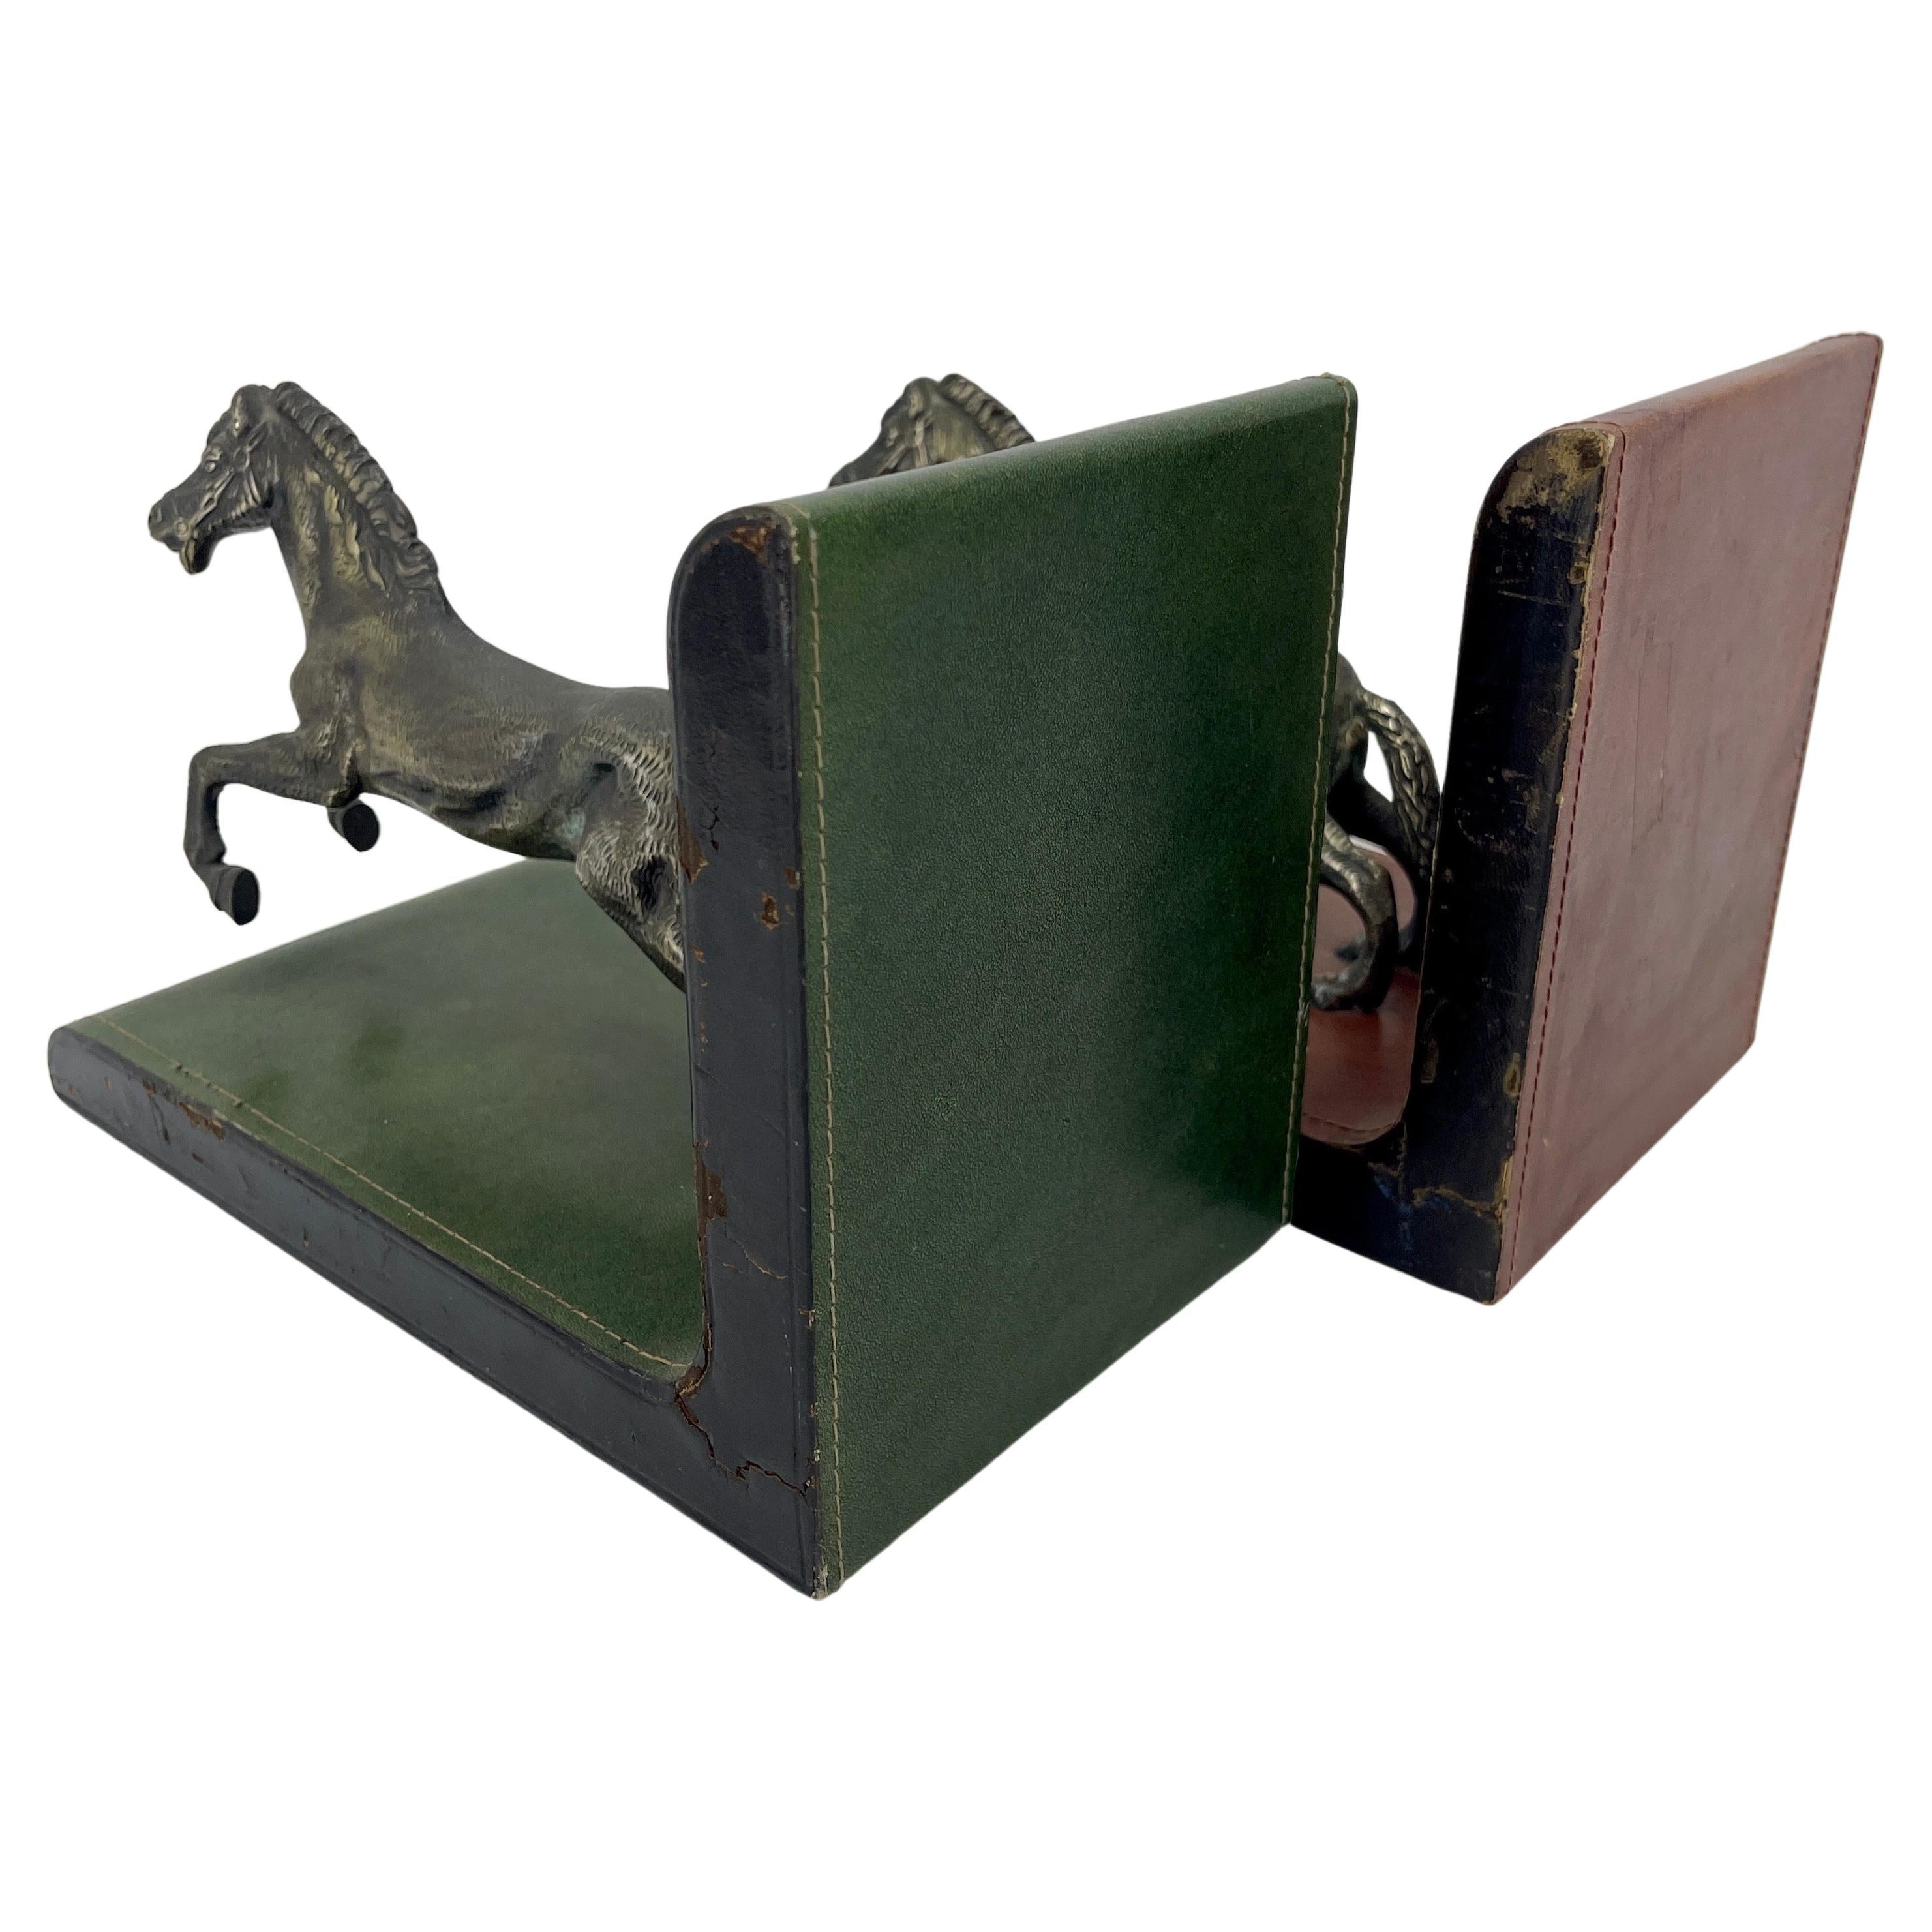 Pair of Italian Red and Green Leather Equestrian Bookends, circa 1950s For Sale 4